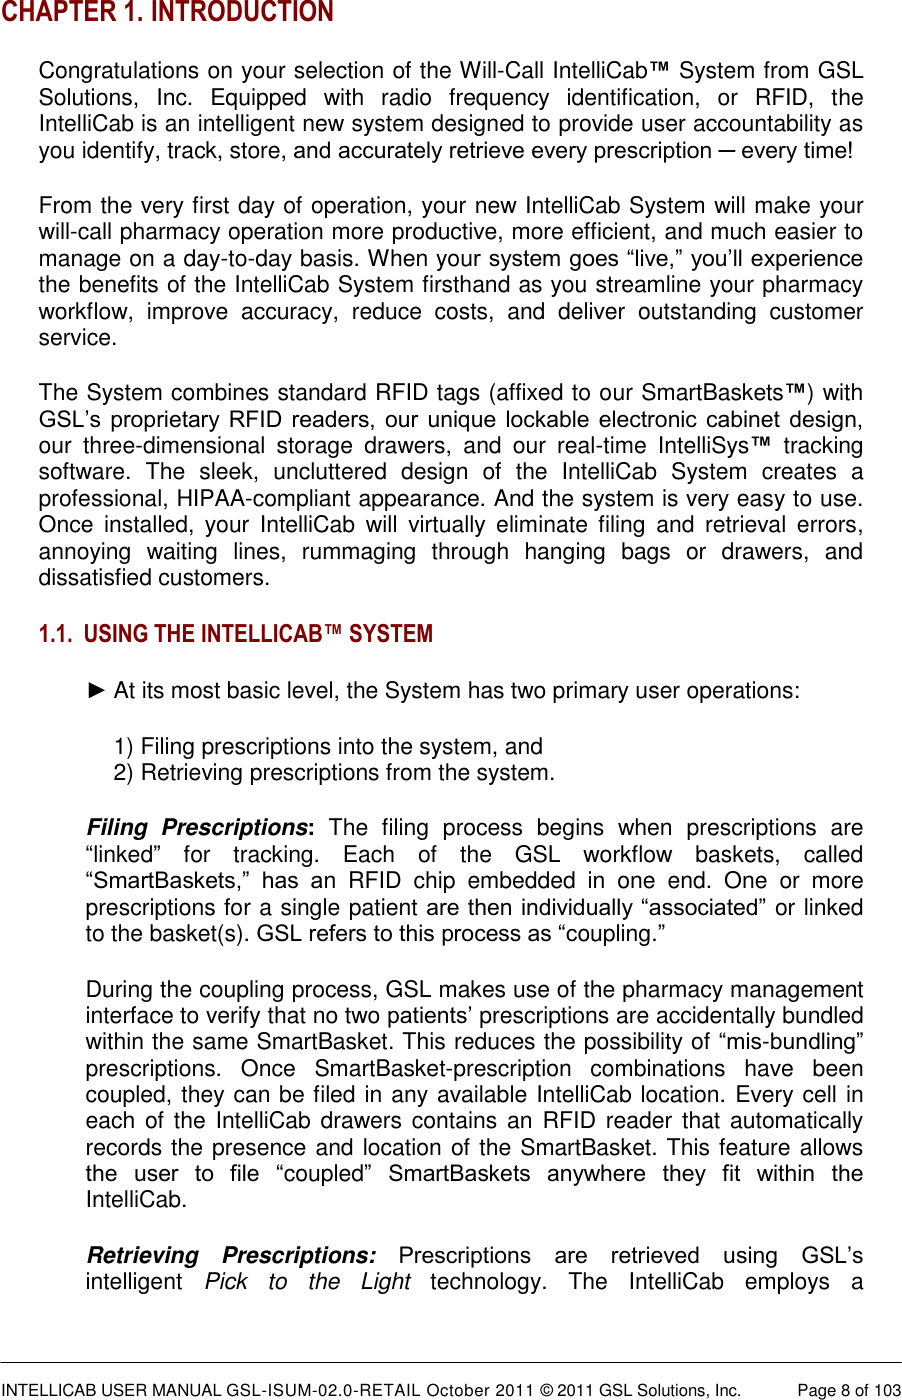  INTELLICAB USER MANUAL GSL-ISUM-02.0-RETAIL October 2011 © 2011 GSL Solutions, Inc.   Page 8 of 103   CHAPTER 1. INTRODUCTION Congratulations on your selection of the Will-Call IntelliCab™ System from GSL Solutions,  Inc.  Equipped  with  radio  frequency  identification,  or  RFID,  the IntelliCab is an intelligent new system designed to provide user accountability as you identify, track, store, and accurately retrieve every prescription ─ every time! From the very first day of operation, your new IntelliCab System will make your will-call pharmacy operation more productive, more efficient, and much easier to manage on a day-to-day basis. When your system goes “live,” you’ll experience the benefits of the IntelliCab System firsthand as you streamline your pharmacy workflow,  improve  accuracy,  reduce  costs,  and  deliver  outstanding  customer service. The System combines standard RFID tags (affixed to our SmartBaskets™) with GSL’s proprietary  RFID  readers, our  unique lockable  electronic  cabinet  design, our  three-dimensional  storage  drawers,  and  our  real-time  IntelliSys™  tracking software.  The  sleek,  uncluttered  design  of  the  IntelliCab  System  creates  a professional, HIPAA-compliant appearance. And the system is very easy to use. Once  installed,  your  IntelliCab  will  virtually  eliminate  filing  and  retrieval  errors, annoying  waiting  lines,  rummaging  through  hanging  bags  or  drawers,  and dissatisfied customers. 1.1. USING THE INTELLICAB™ SYSTEM ► At its most basic level, the System has two primary user operations: 1) Filing prescriptions into the system, and  2) Retrieving prescriptions from the system. Filing  Prescriptions:  The  filing  process  begins  when  prescriptions  are “linked”  for  tracking.  Each  of  the  GSL  workflow  baskets,  called “SmartBaskets,”  has  an  RFID  chip  embedded  in  one  end.  One  or  more prescriptions for a single patient are then individually “associated” or linked to the basket(s). GSL refers to this process as “coupling.” During the coupling process, GSL makes use of the pharmacy management interface to verify that no two patients’ prescriptions are accidentally bundled within the same SmartBasket. This reduces the possibility of “mis-bundling” prescriptions.  Once  SmartBasket-prescription  combinations  have  been coupled, they can be filed in any available IntelliCab location. Every cell in each of the  IntelliCab drawers contains an RFID reader that automatically records the presence and location of the SmartBasket. This feature allows the  user  to  file  “coupled”  SmartBaskets  anywhere  they  fit  within  the IntelliCab. Retrieving  Prescriptions:  Prescriptions  are  retrieved  using  GSL’s intelligent  Pick  to  the  Light  technology.  The  IntelliCab  employs  a 